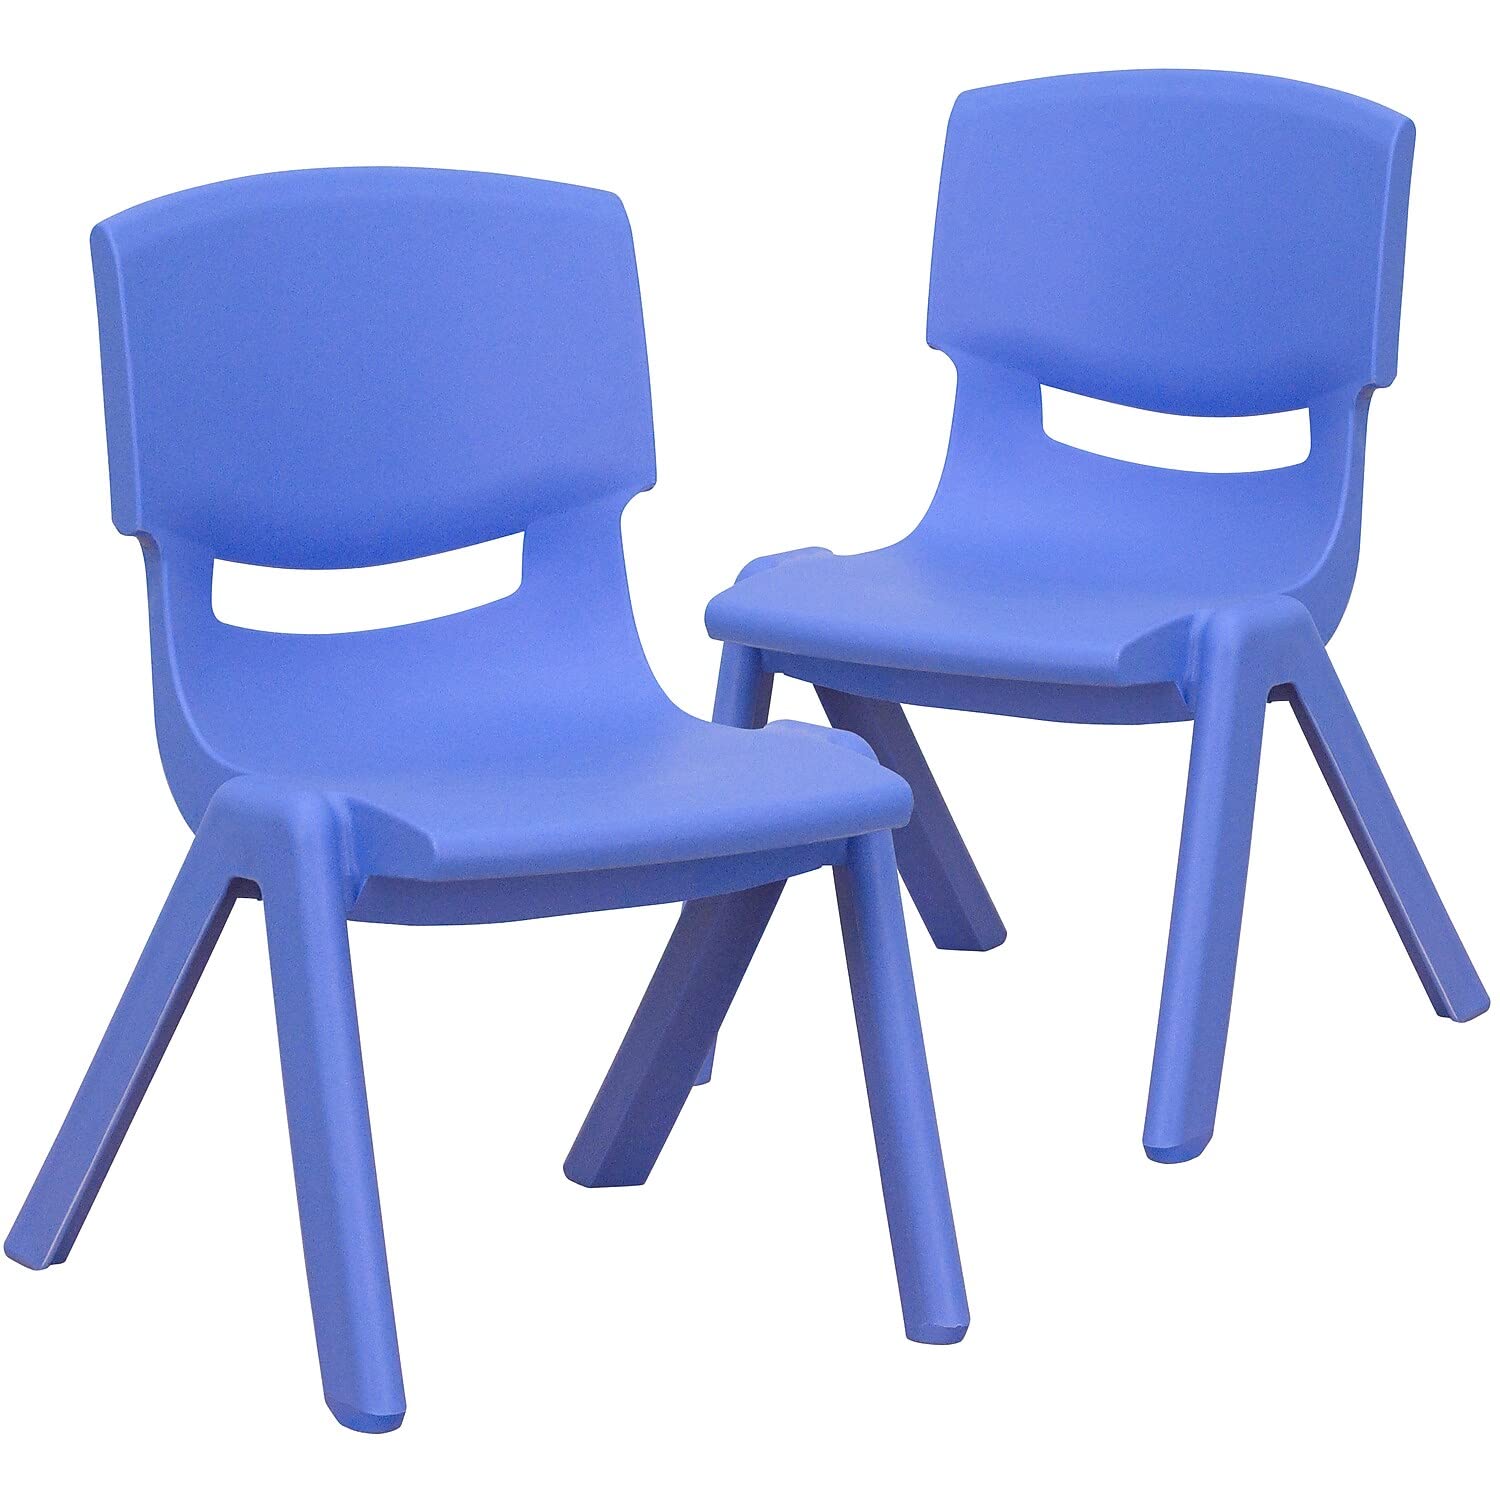 2-Count 10.5"H Flash Furniture Whitney Plastic Stackable Chair (Blue) $25.45 ($12.73 each) + Free Shipping